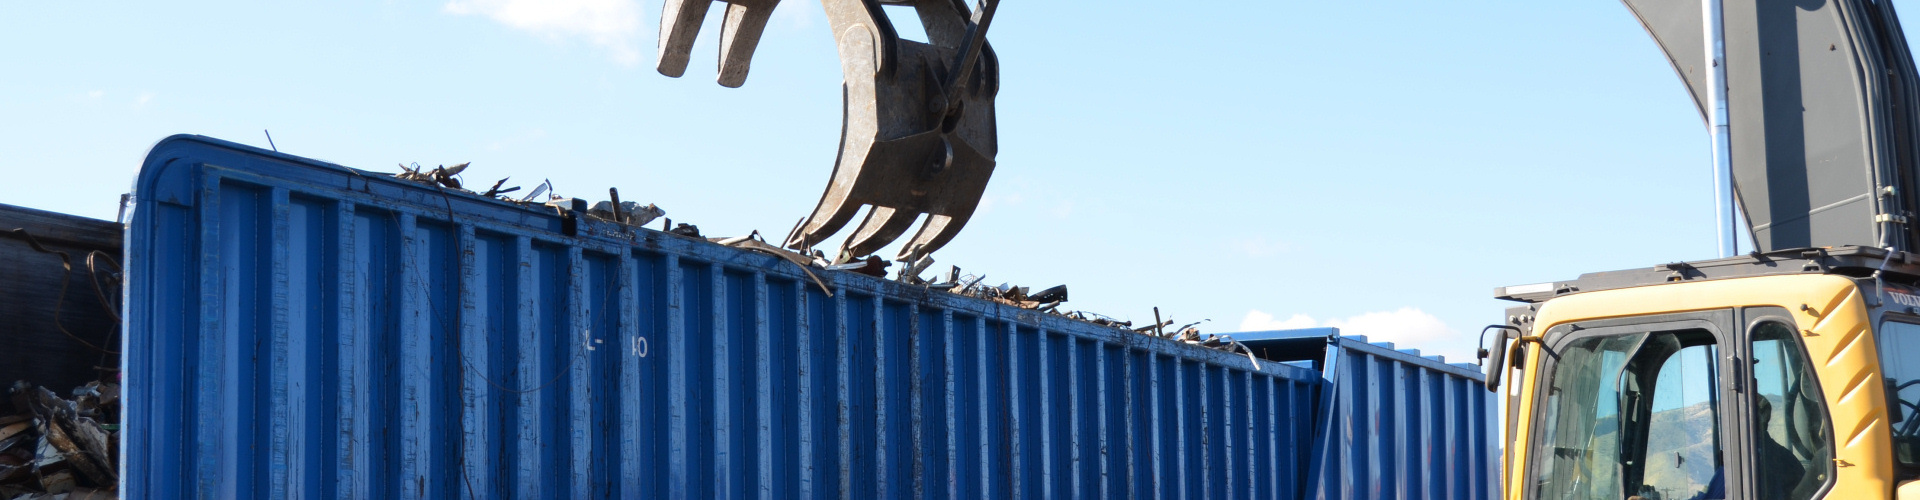 Photo of mechanical claw removing scrap metal from truck trailer.